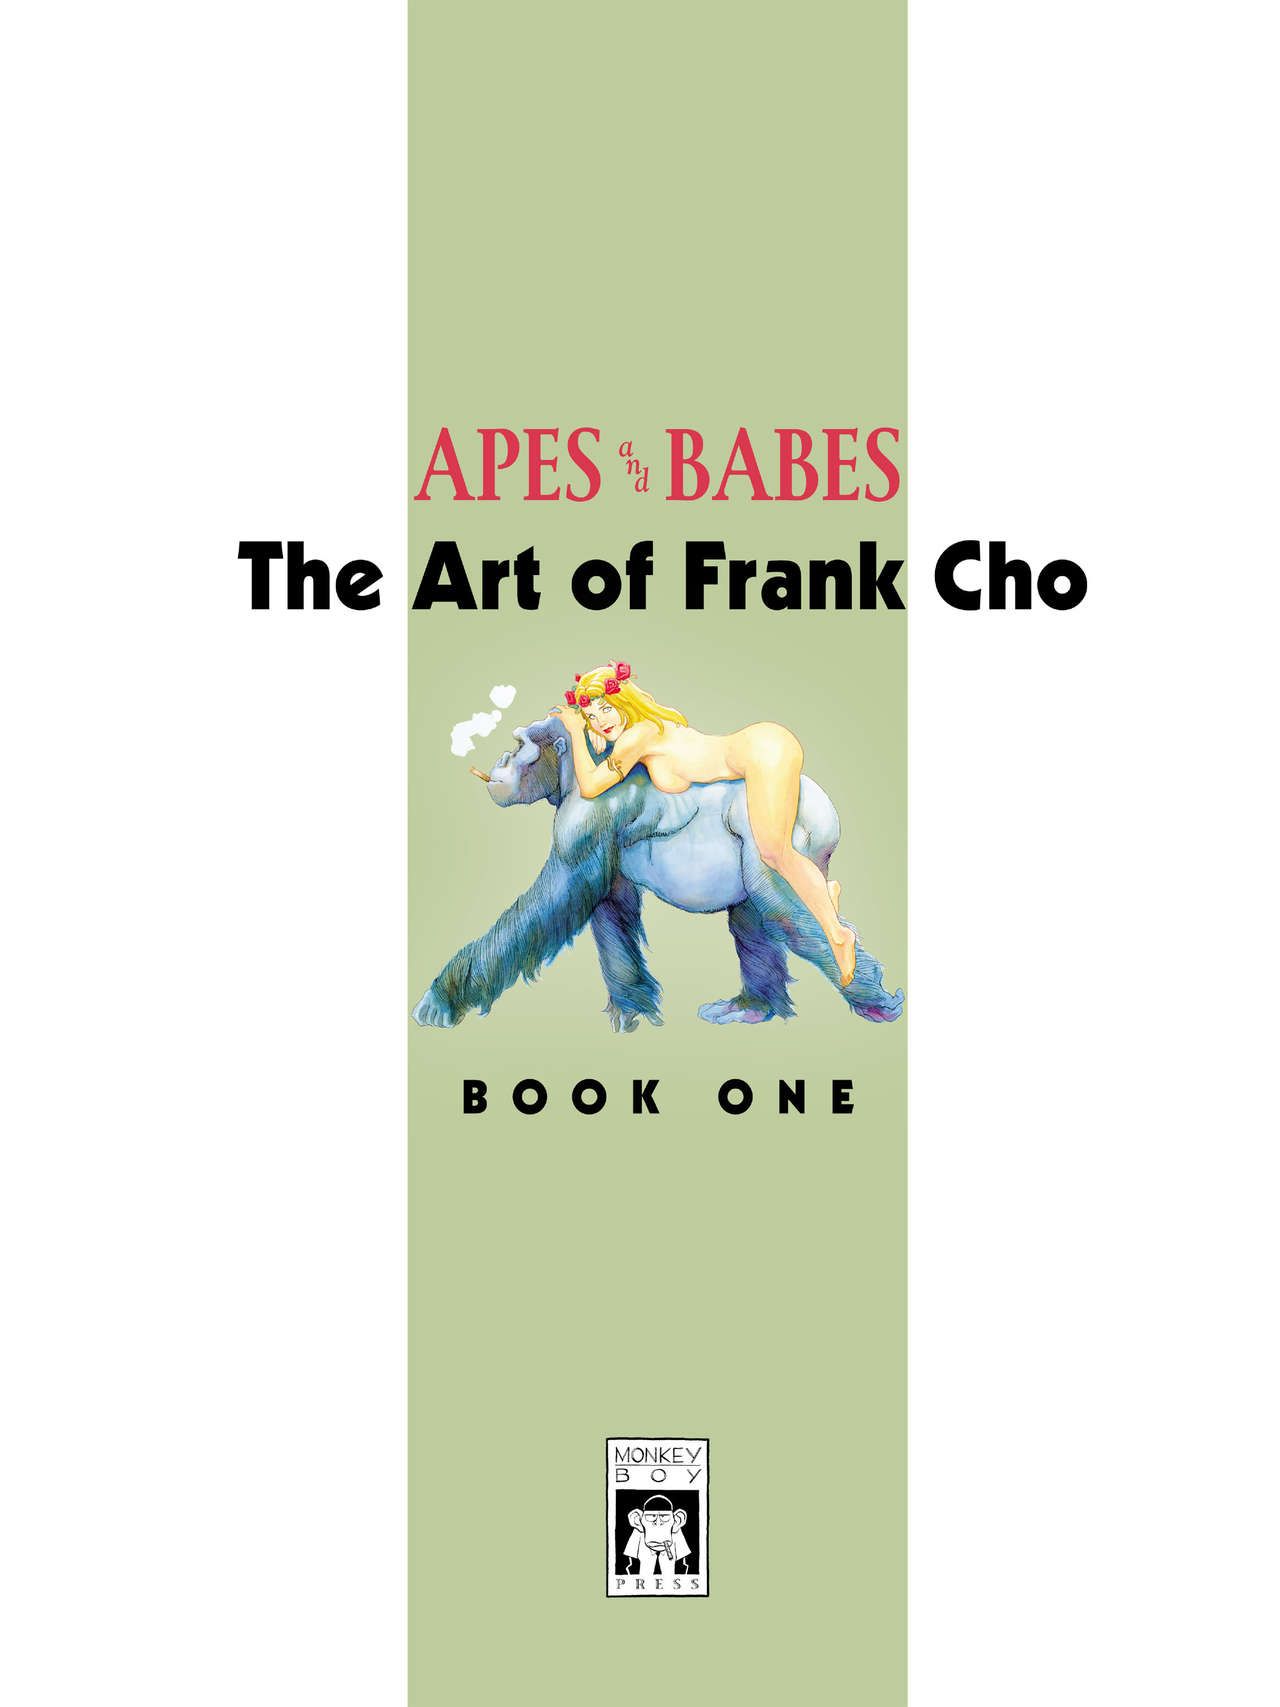 [Frank Cho] Apes & Babes: The Art Of Frank Cho 2